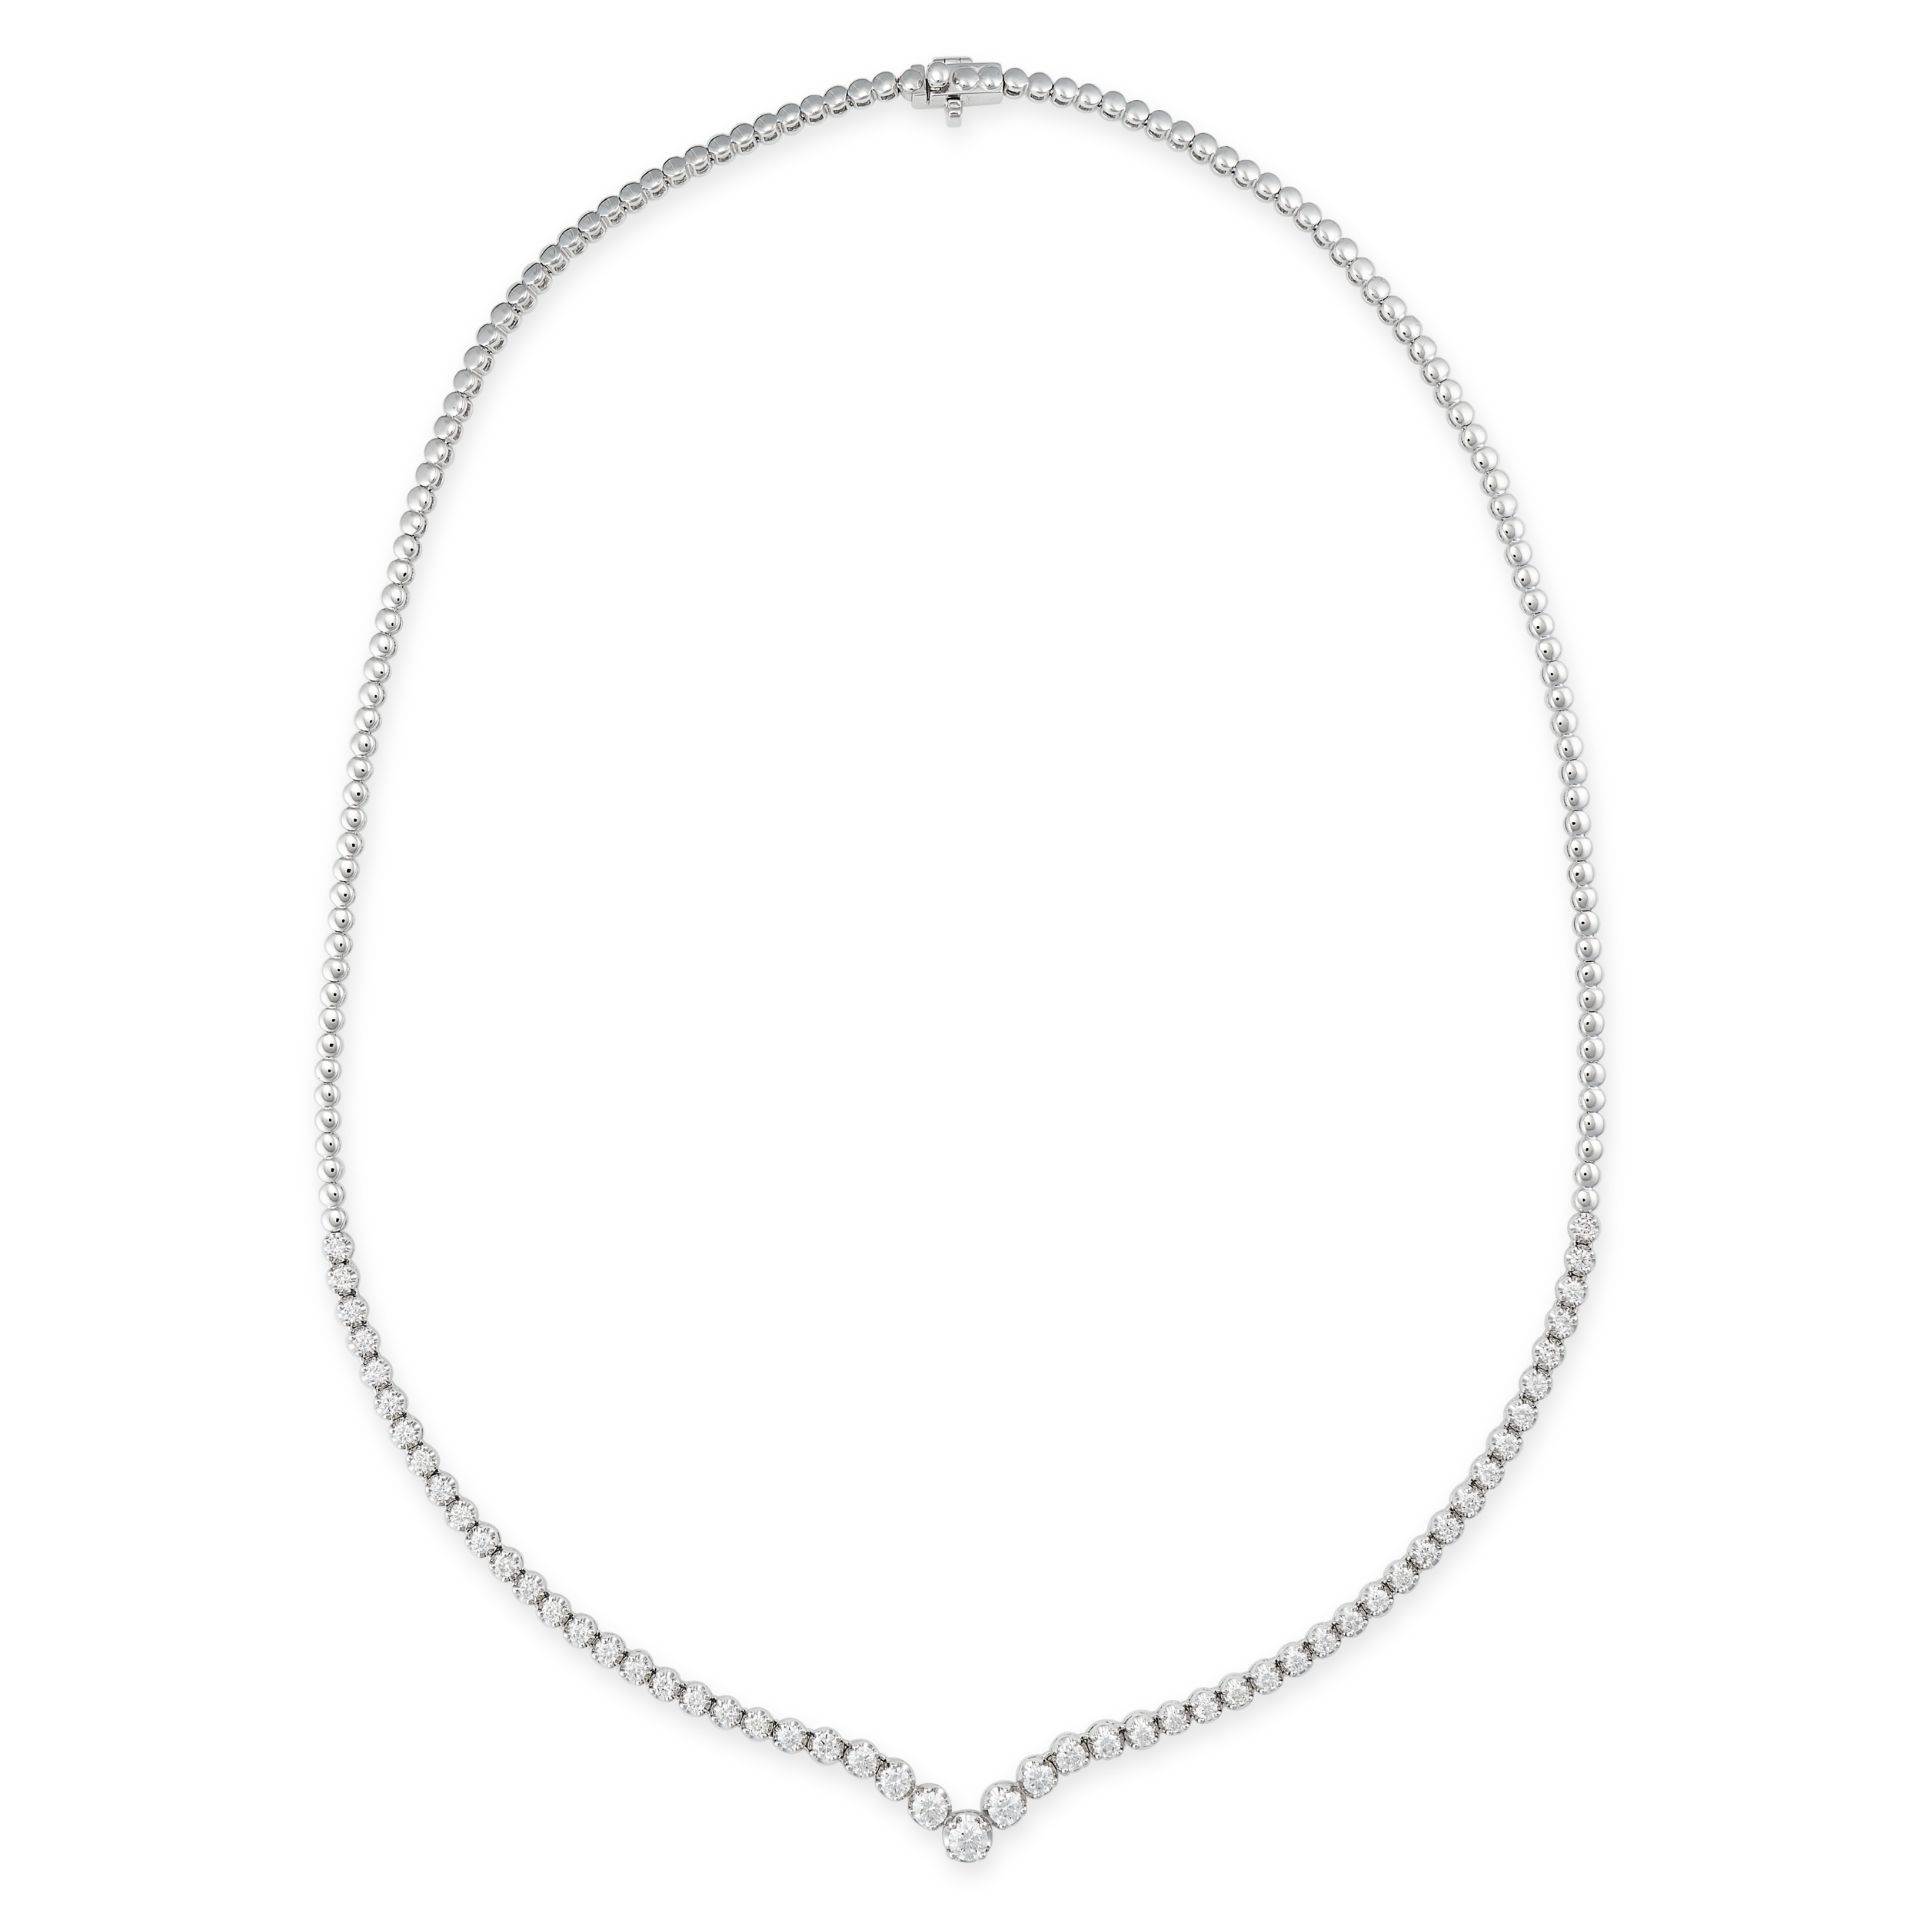 A DIAMOND LINE NECKLACE in 18ct white gold, set with a row of round brilliant cut diamonds, the d...